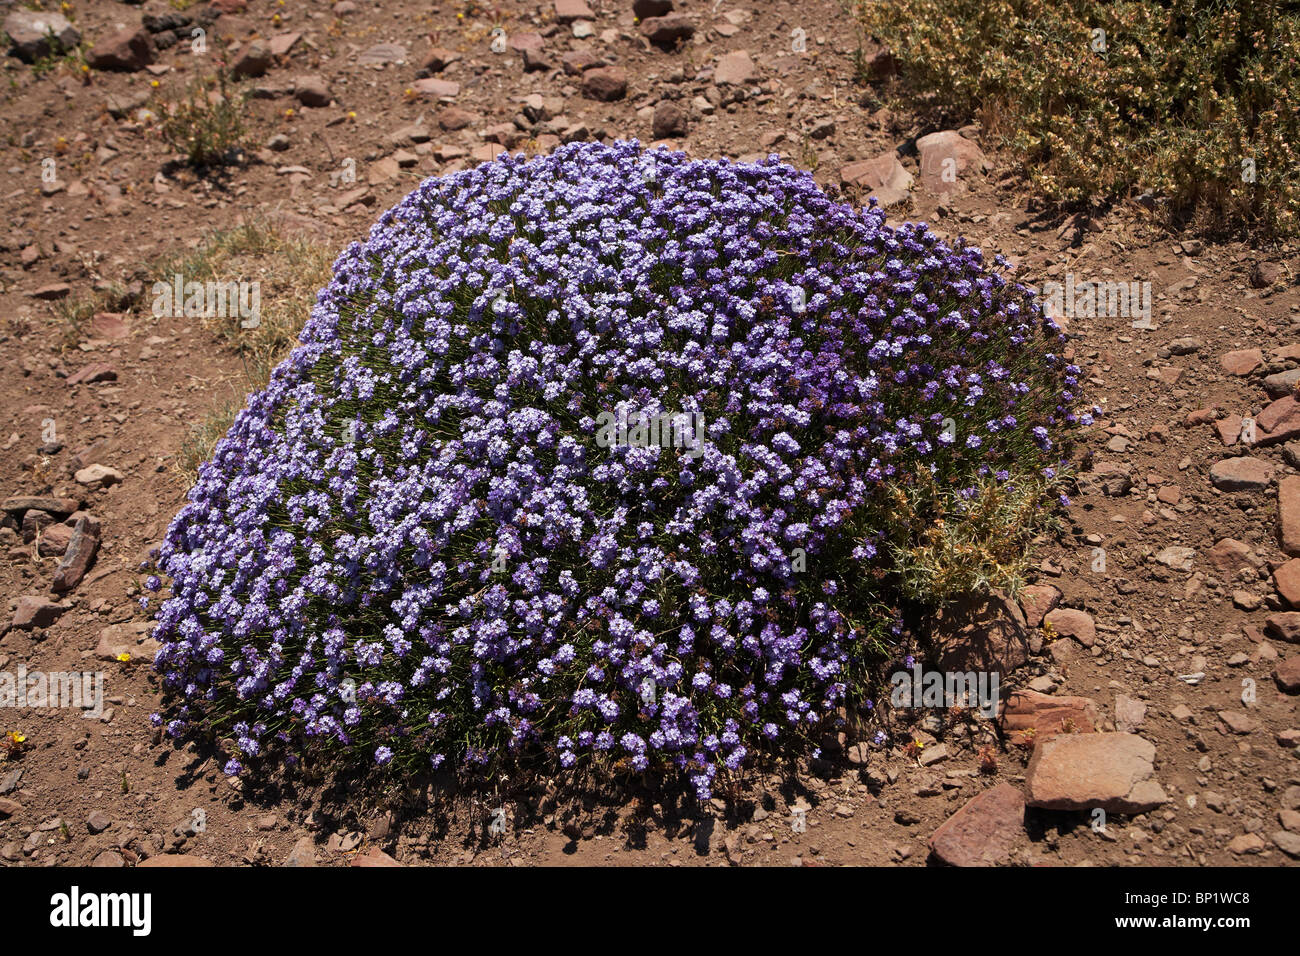 Flowering Alpine Plant, Andes Mountains, Chile, South America Stock Photo